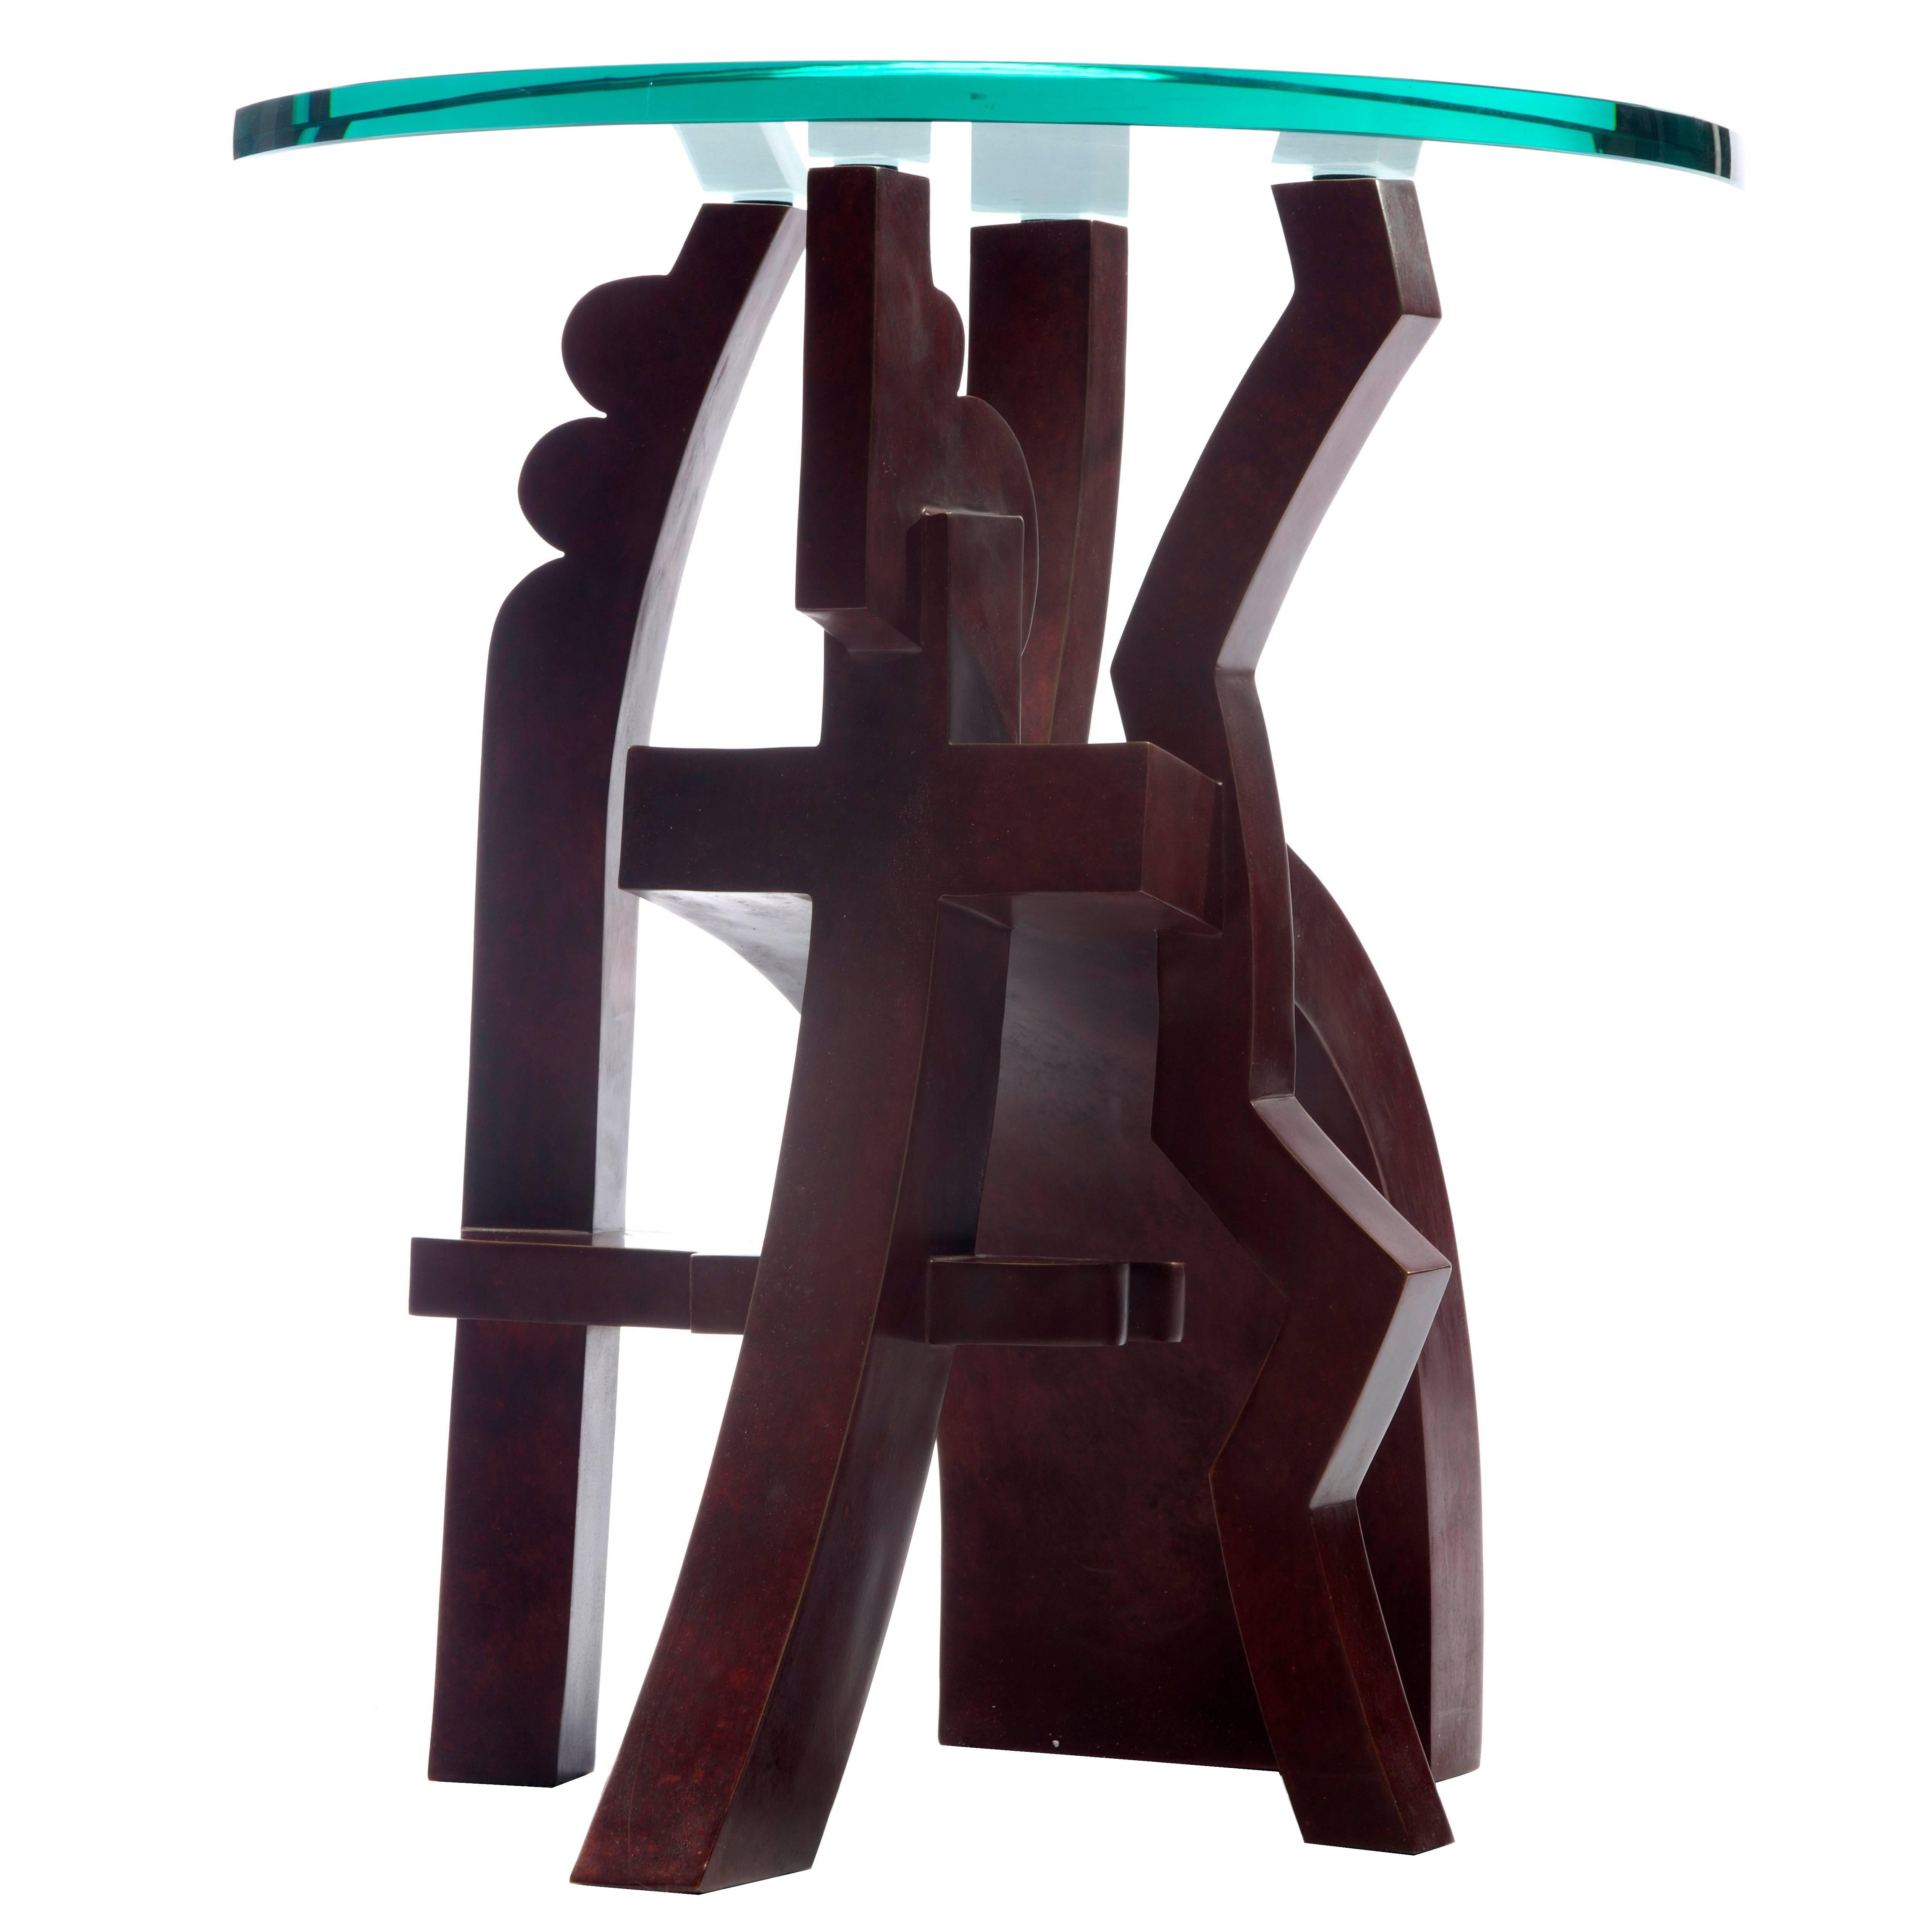 Small Side Table #1 in Patinaed Bronze and Glass by Garry Knox Bennett 